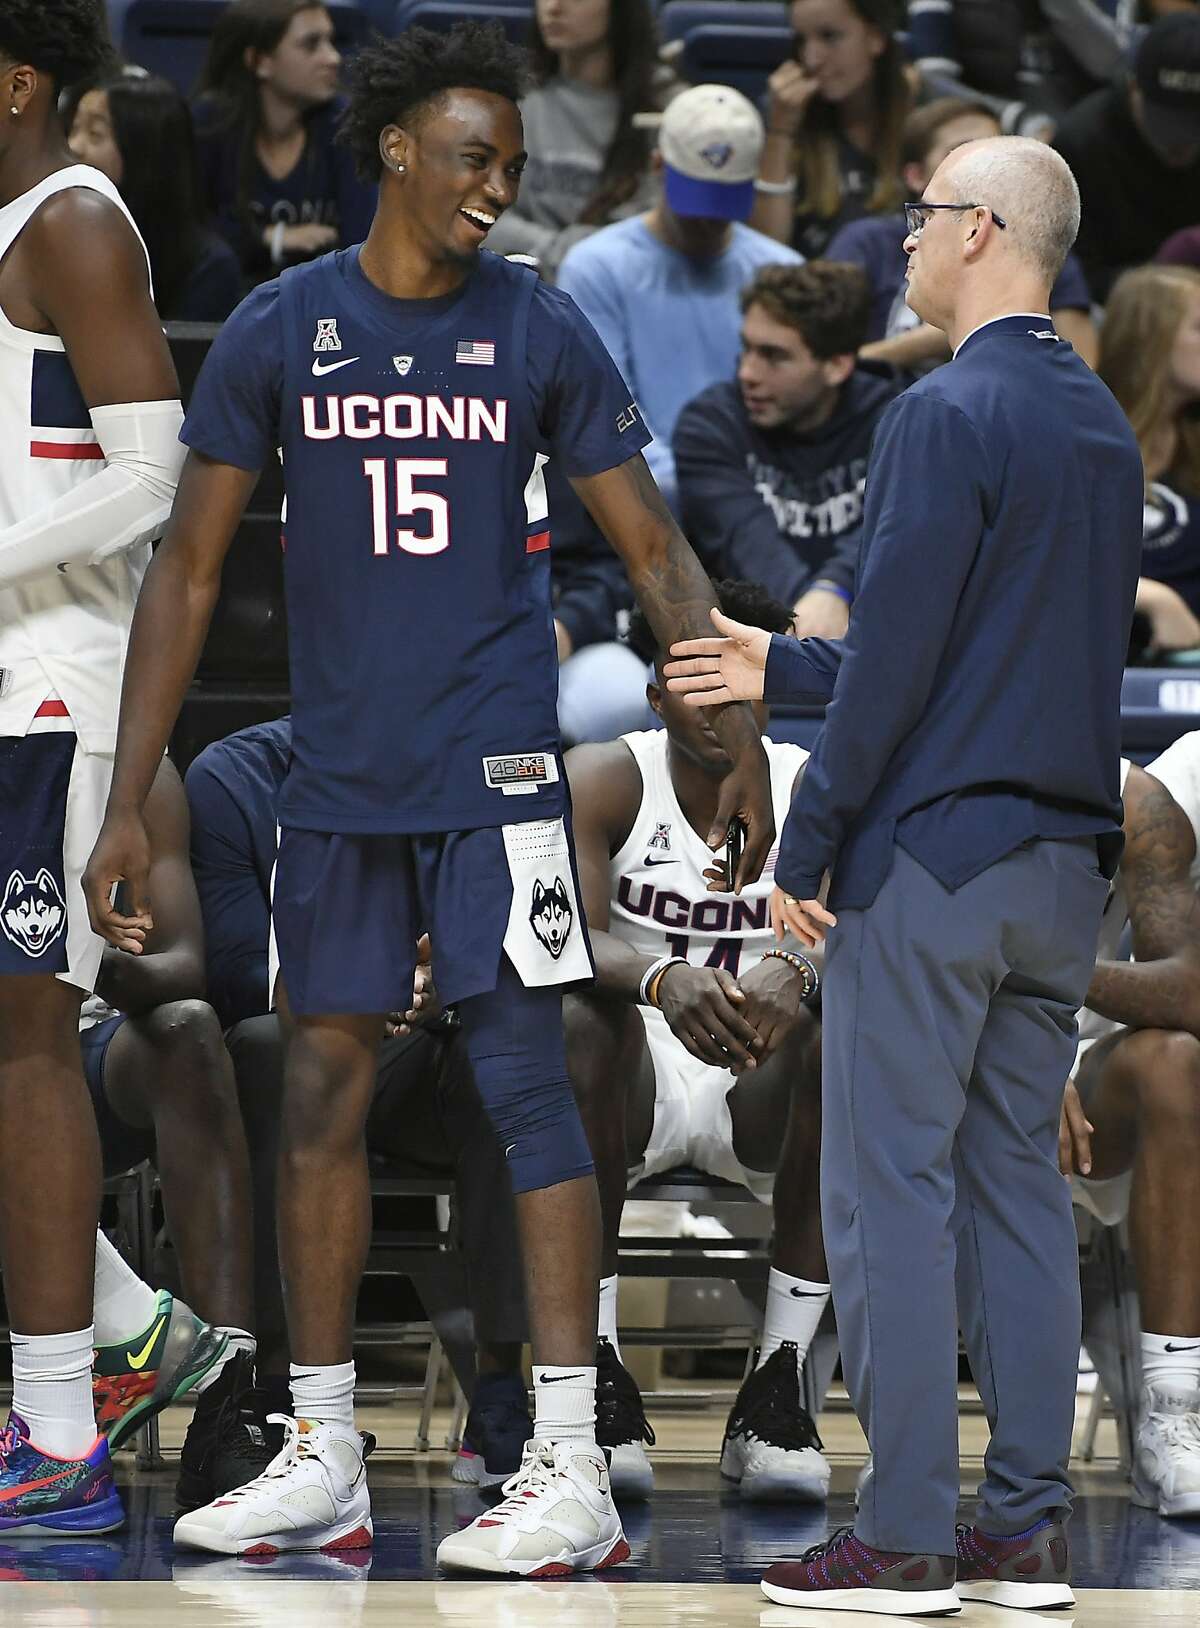 Connecticut's Sidney Wilson laughs as he talks with coach Dan Hurley during the UConn men's and women's basketball teams' annual First Night event in Storrs, Conn., Friday, Oct. 12, 2018. (AP Photo/Jessica Hill)